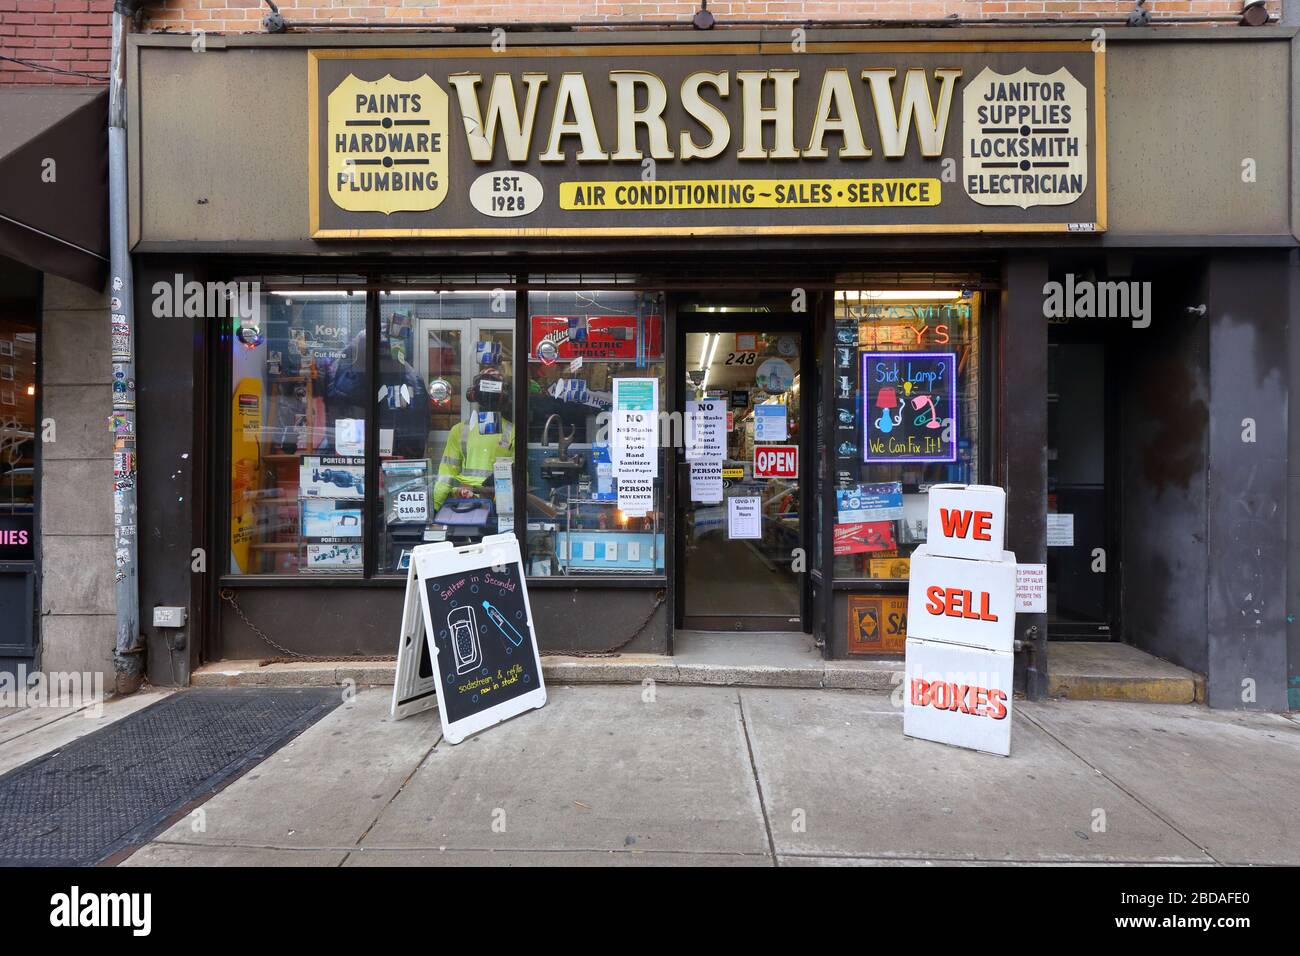 Warshaw Hardware, 248 3rd Avenue, New York, NY. exterior storefront of a hardware store in the Gramercy neighborhood of Manhattan. Stock Photo